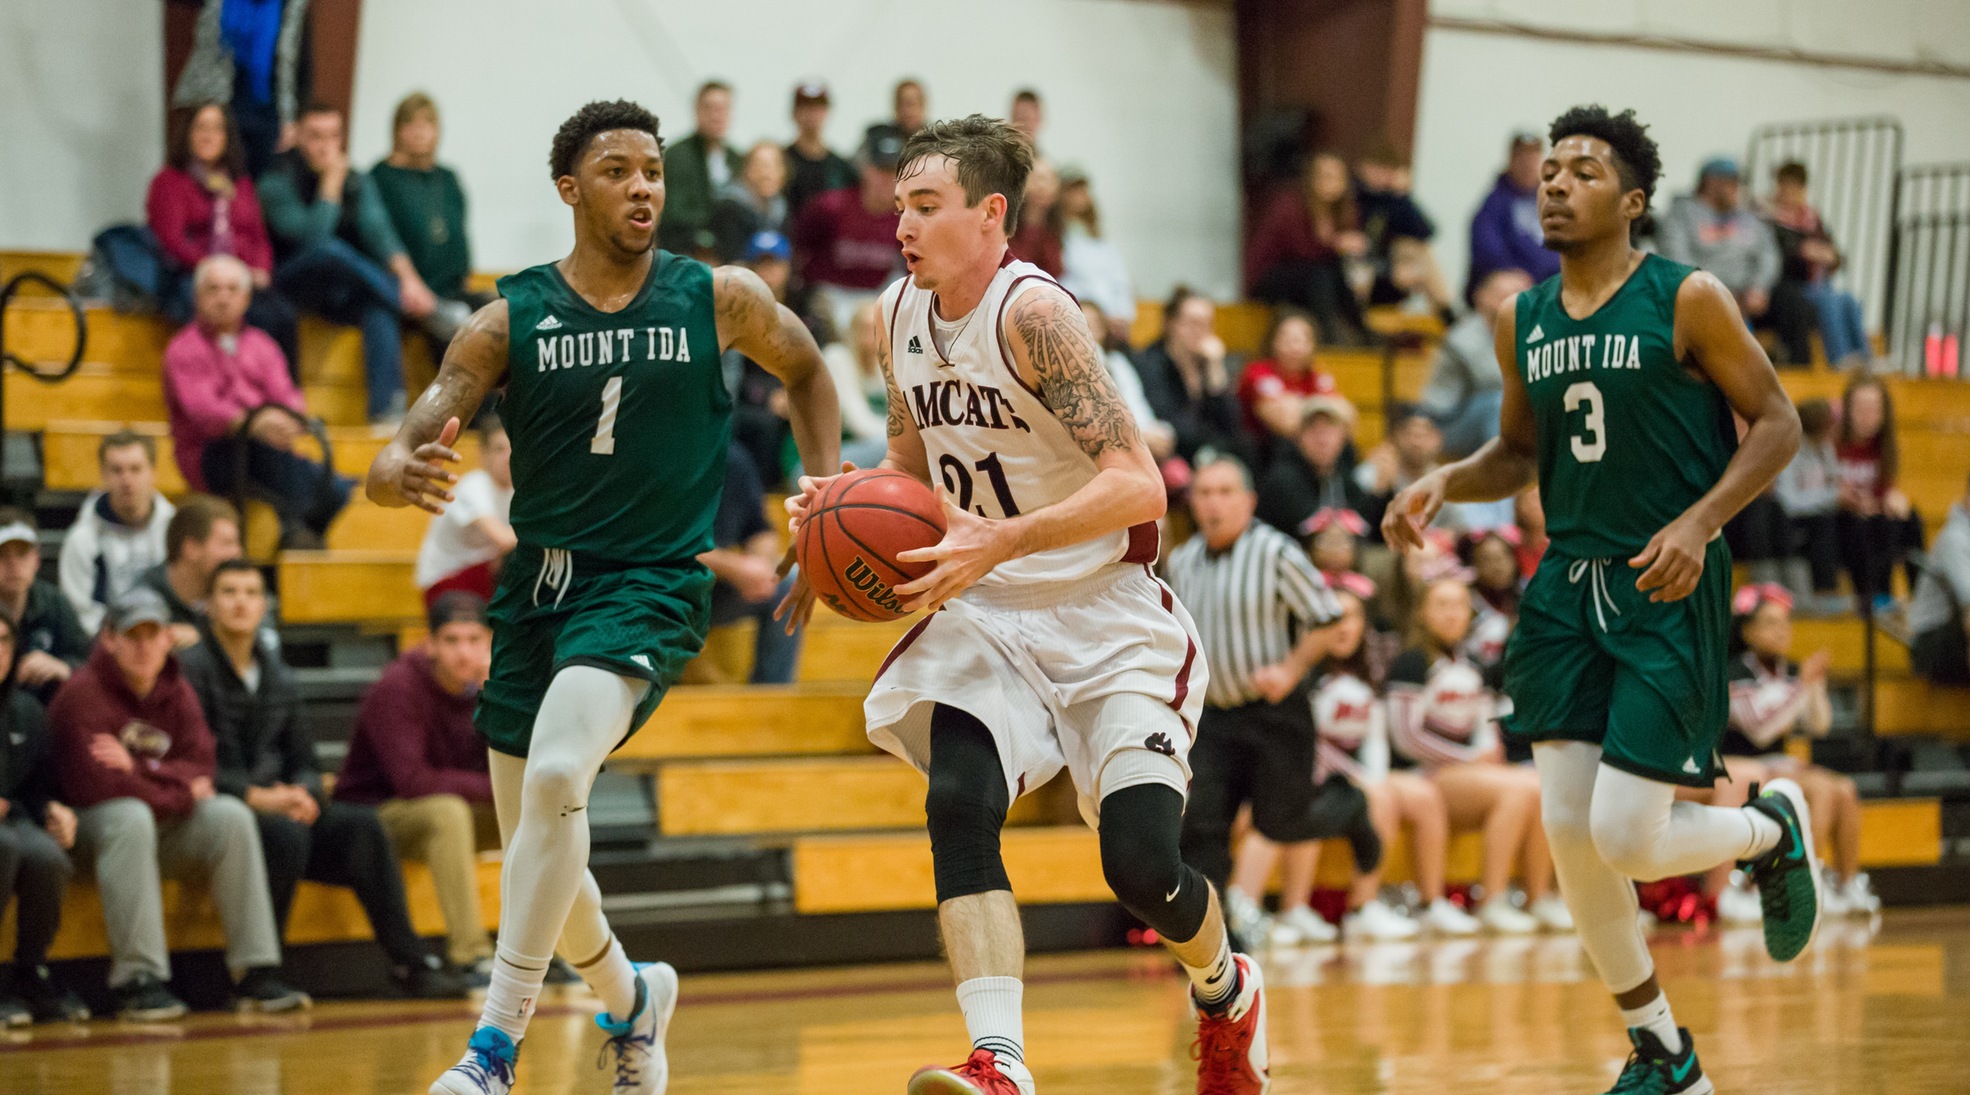 Men's Basketball Suffers Loss to Lasers, 75-61